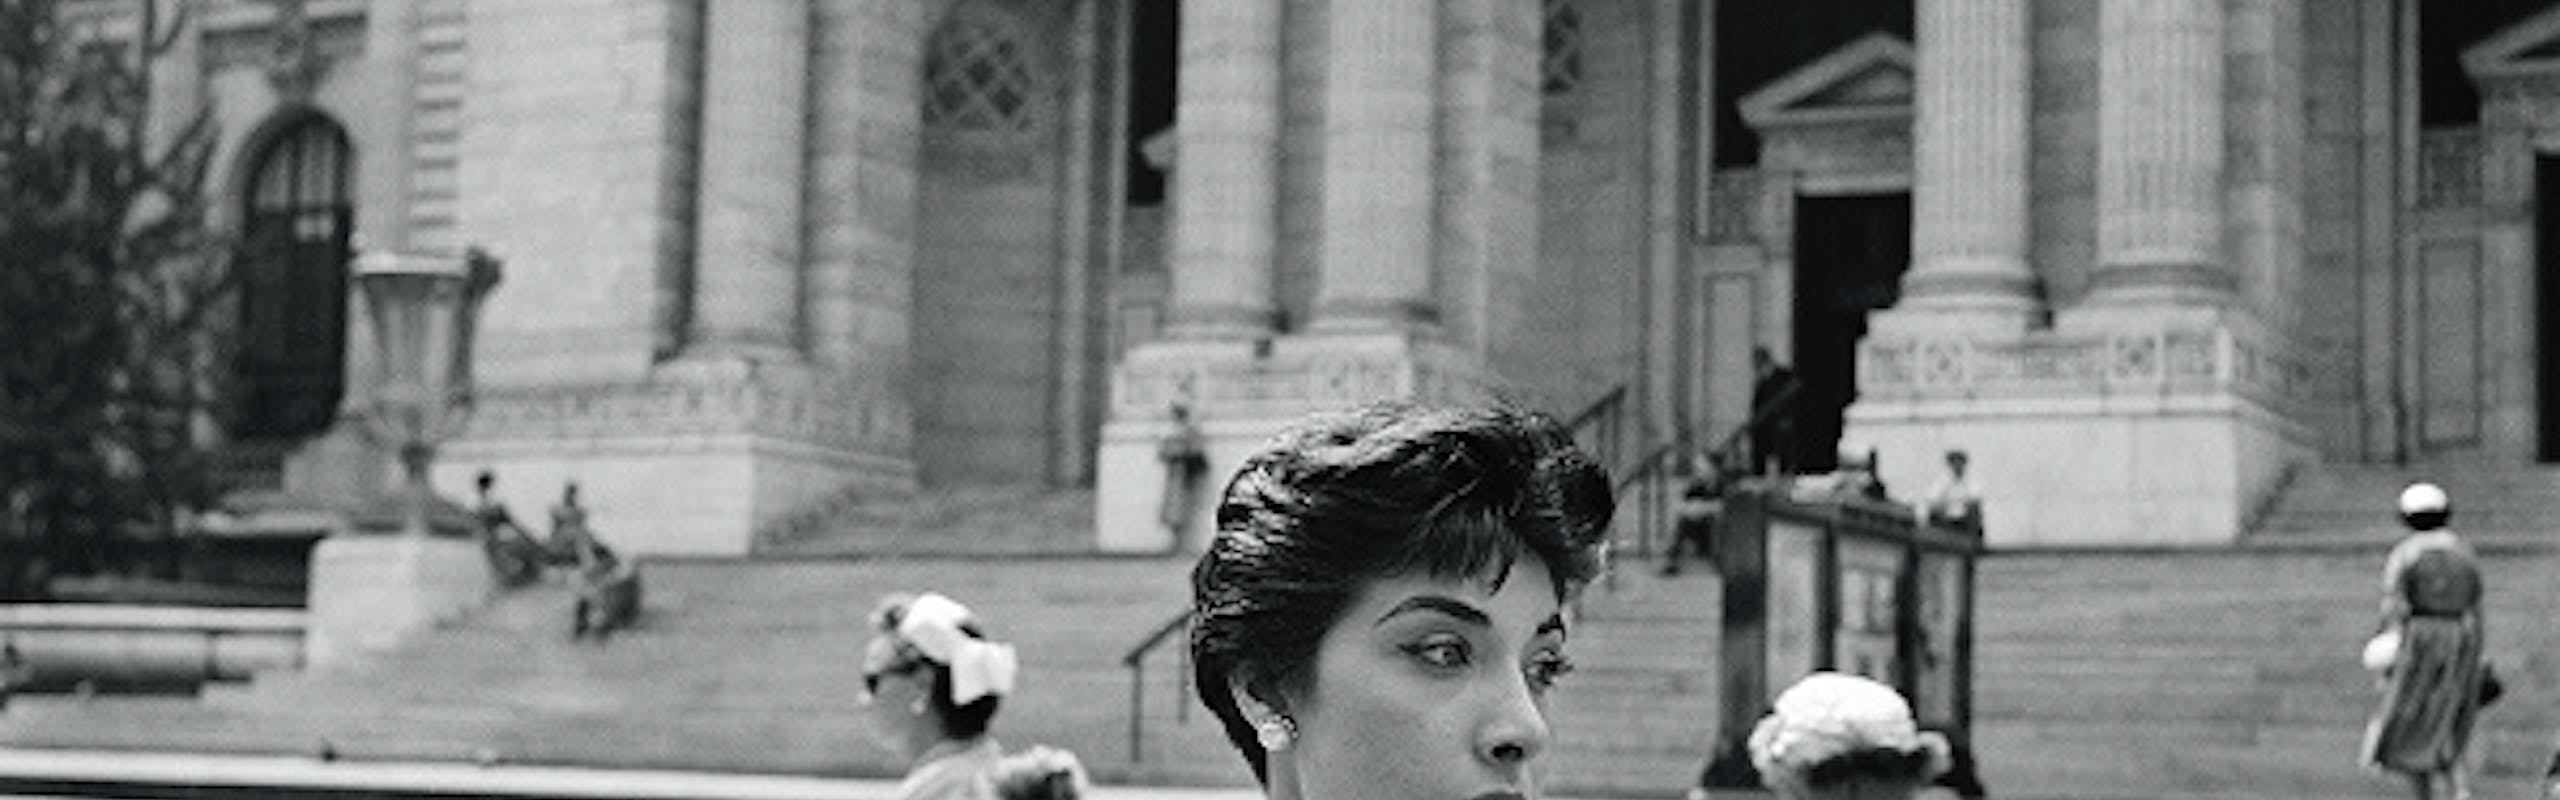 Bibliothèque publique de New York vers 1954 tirage argentique, 2012 © Estate of Vivian Maier, Courtesy of Maloof Collection and Howard Greenberg Gallery, NY